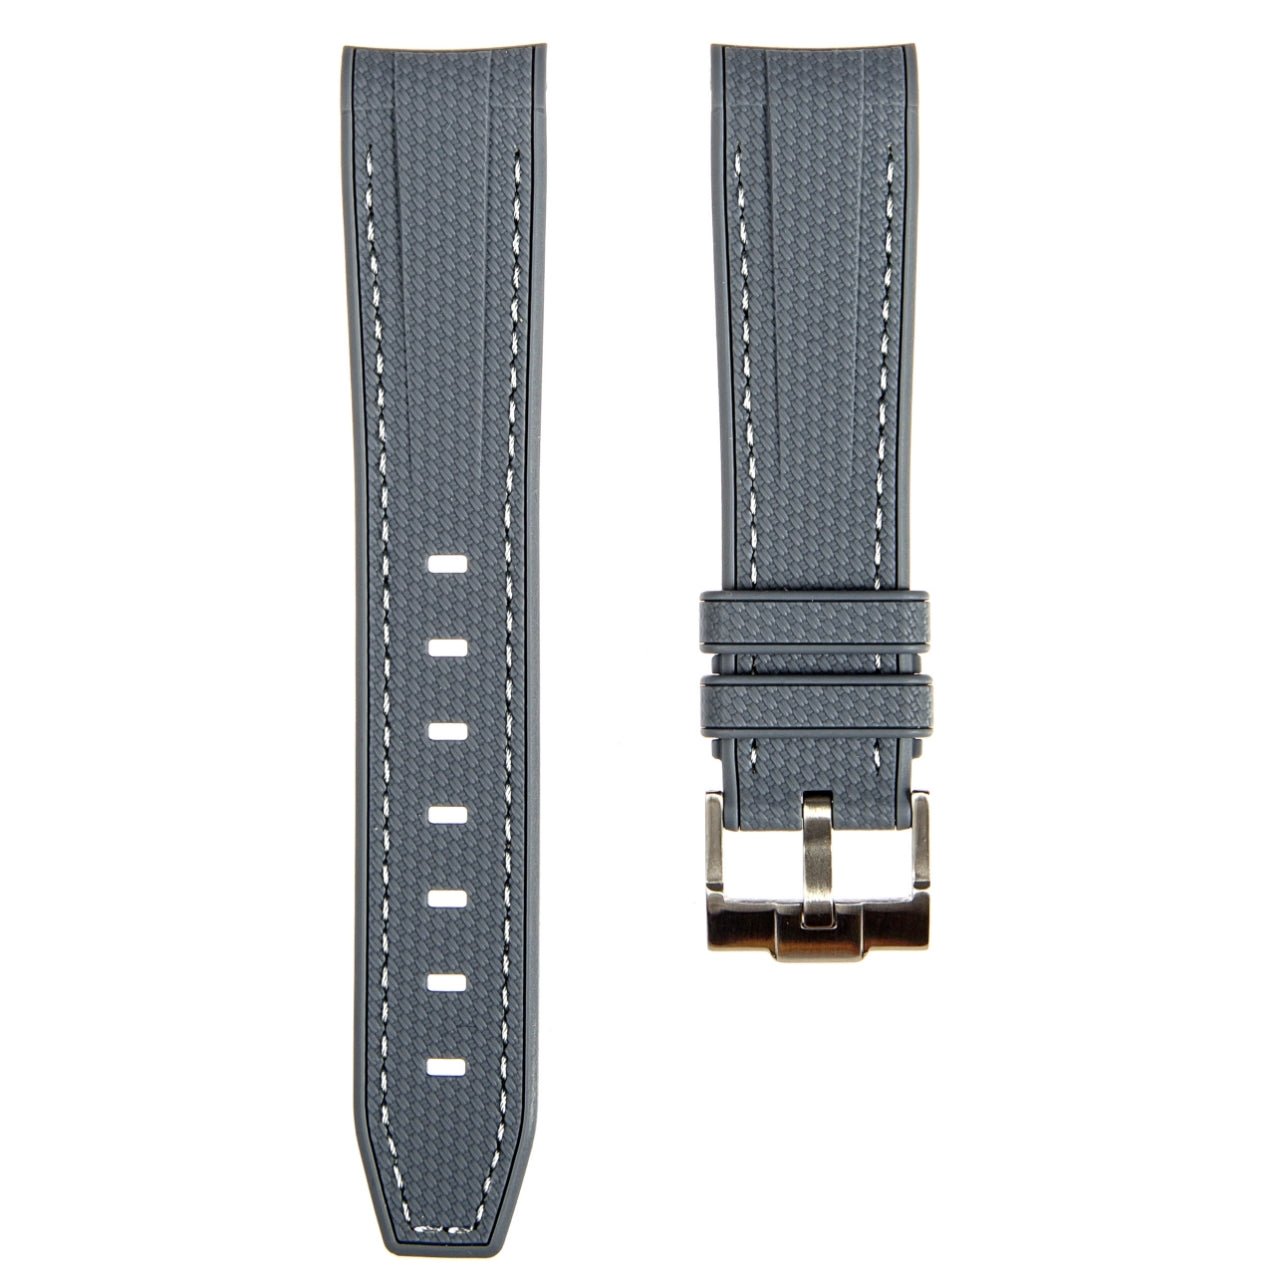 Textured Curved End Premium Silicone Strap - Grey with White Stitch (2405) -StrapSeeker